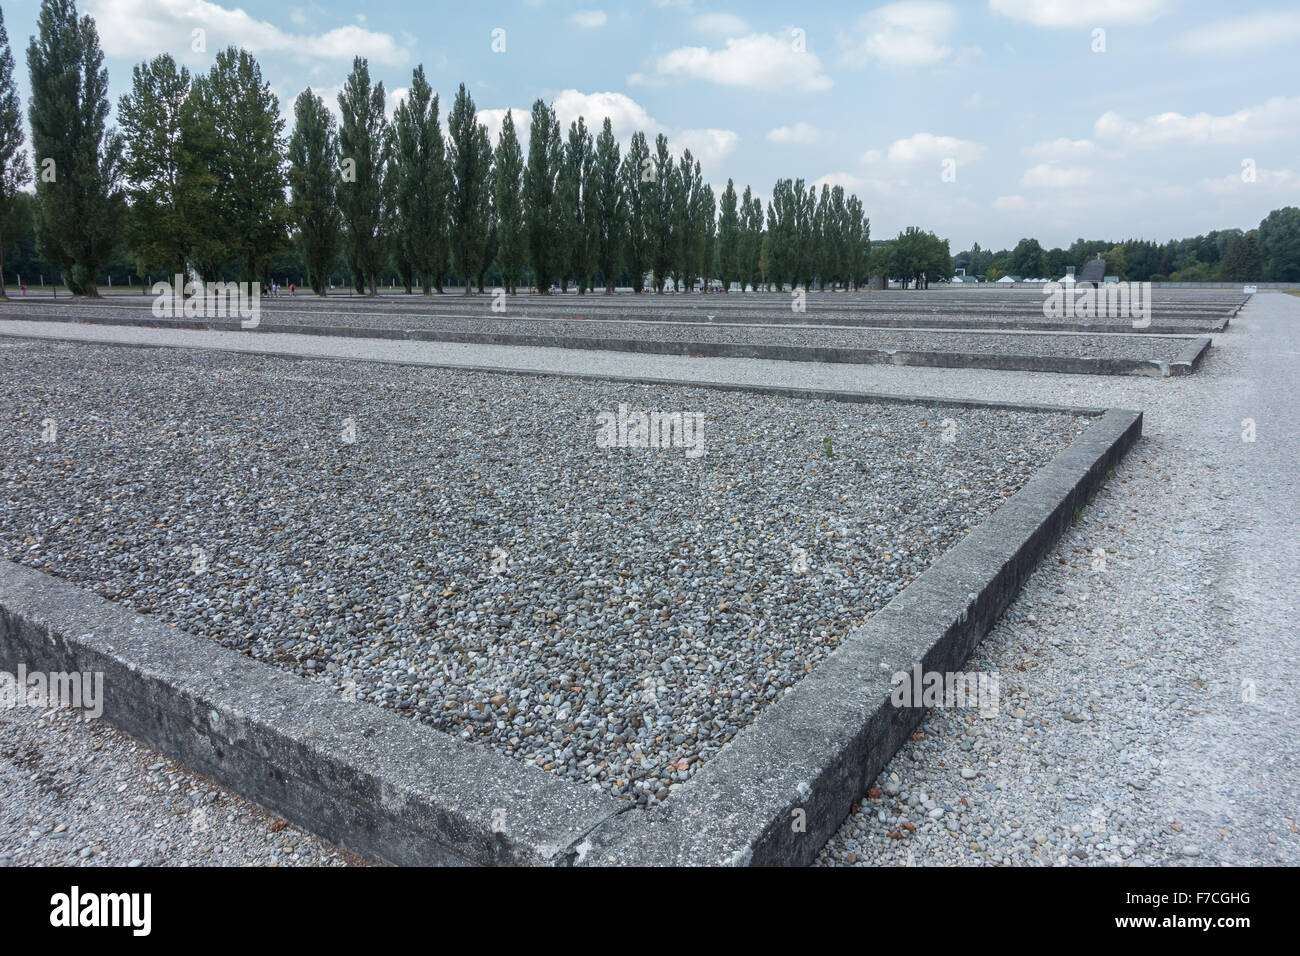 Former site of prisoners' huts in the Dachau concentration camp near Munich, Germany. The site is now a memorial and a museum. Stock Photo